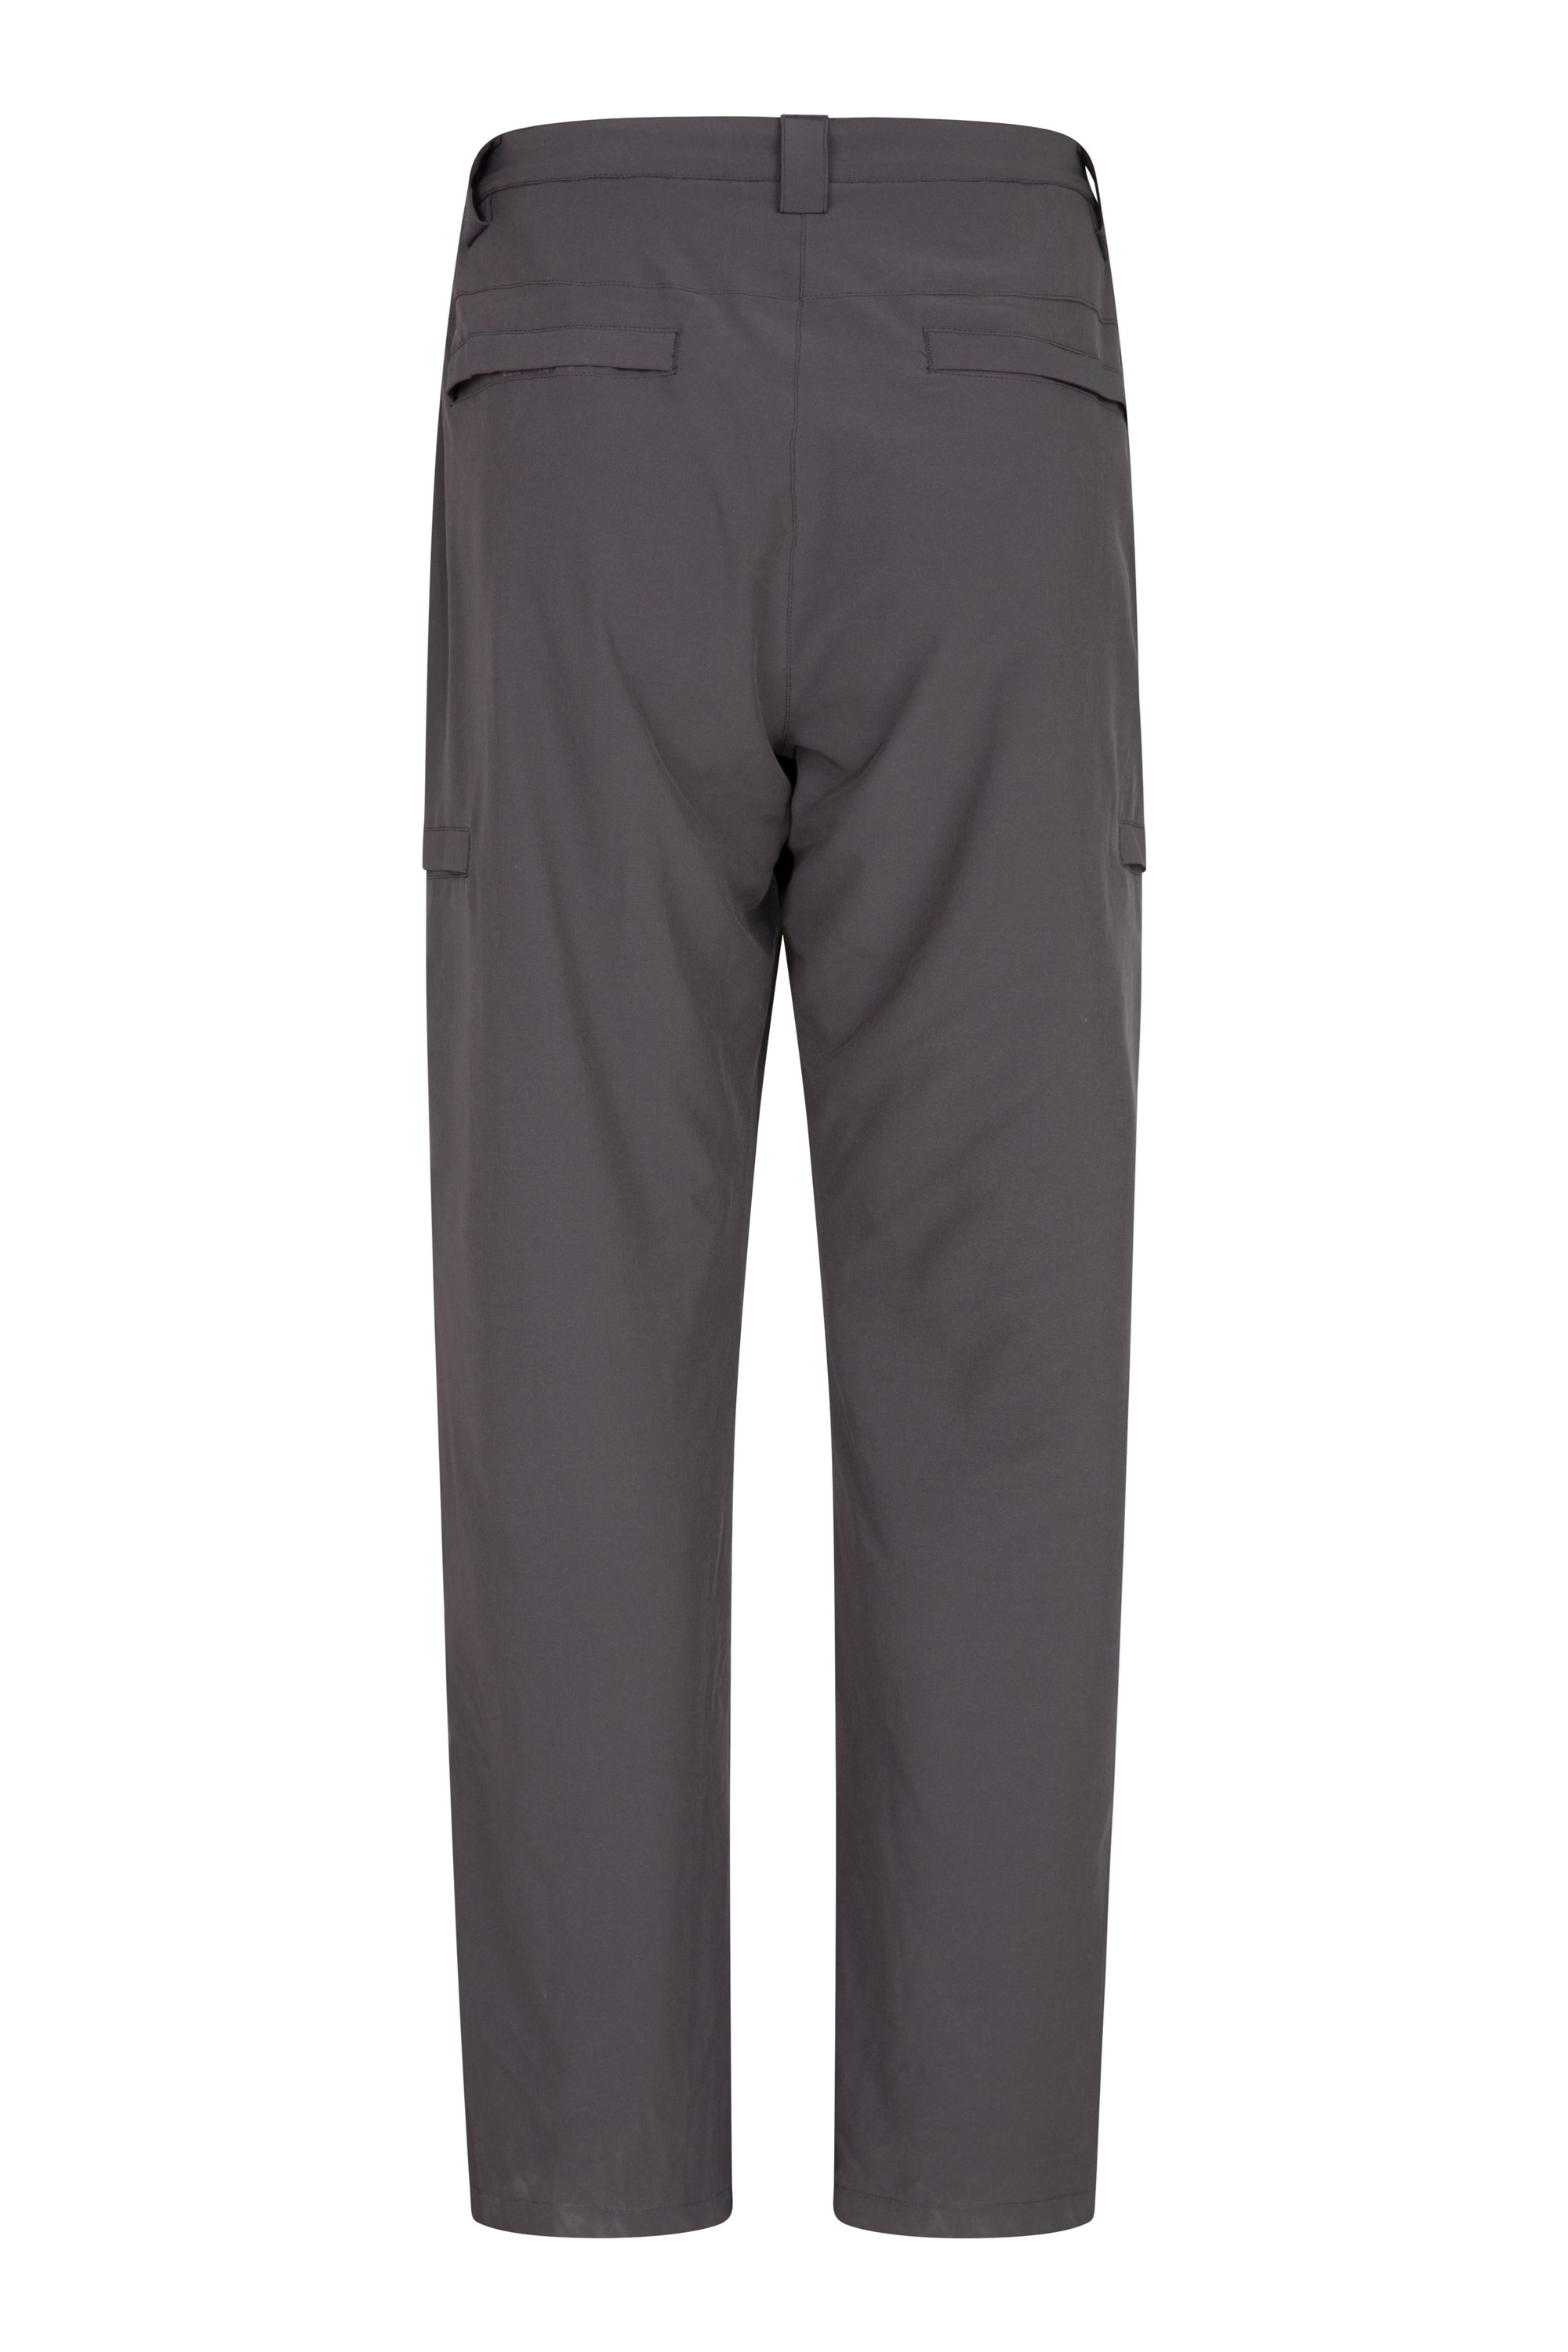 thermal lined pants